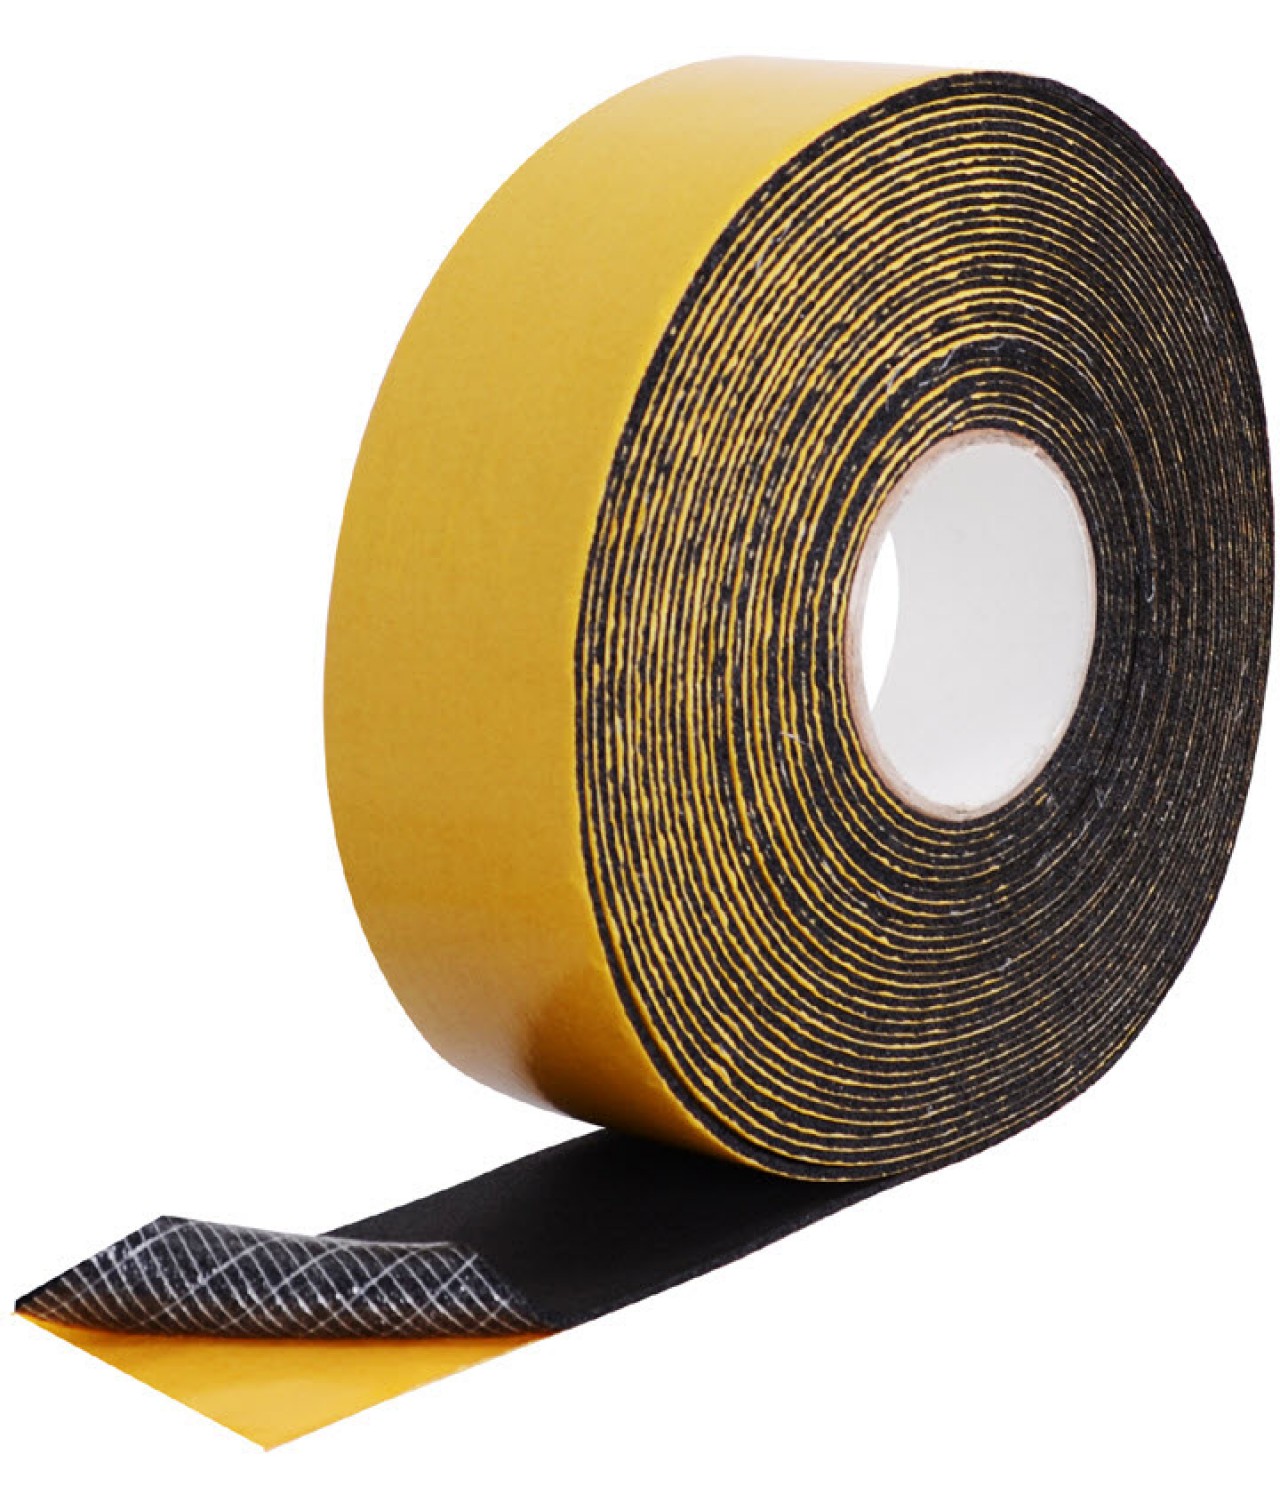 Adhesive insulation tape for joints ARM50/15/3, 15 m